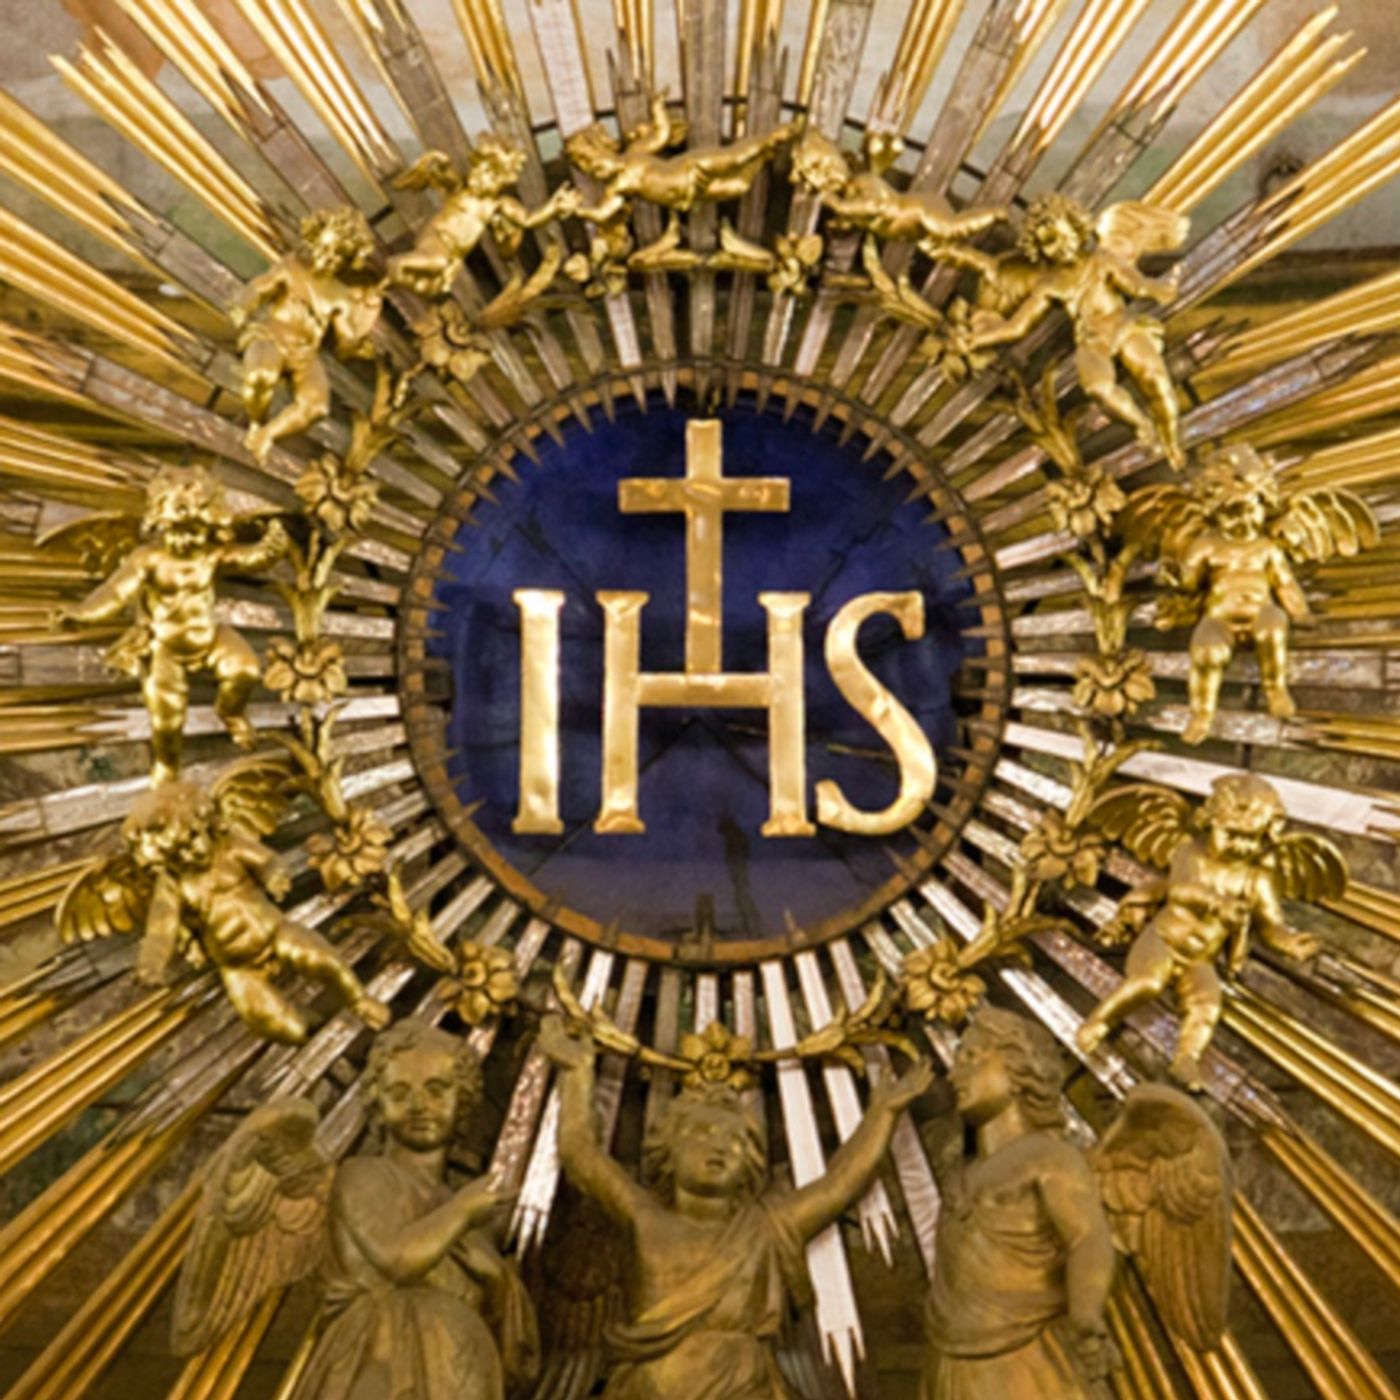 January 3: The Most Holy Name of Jesus